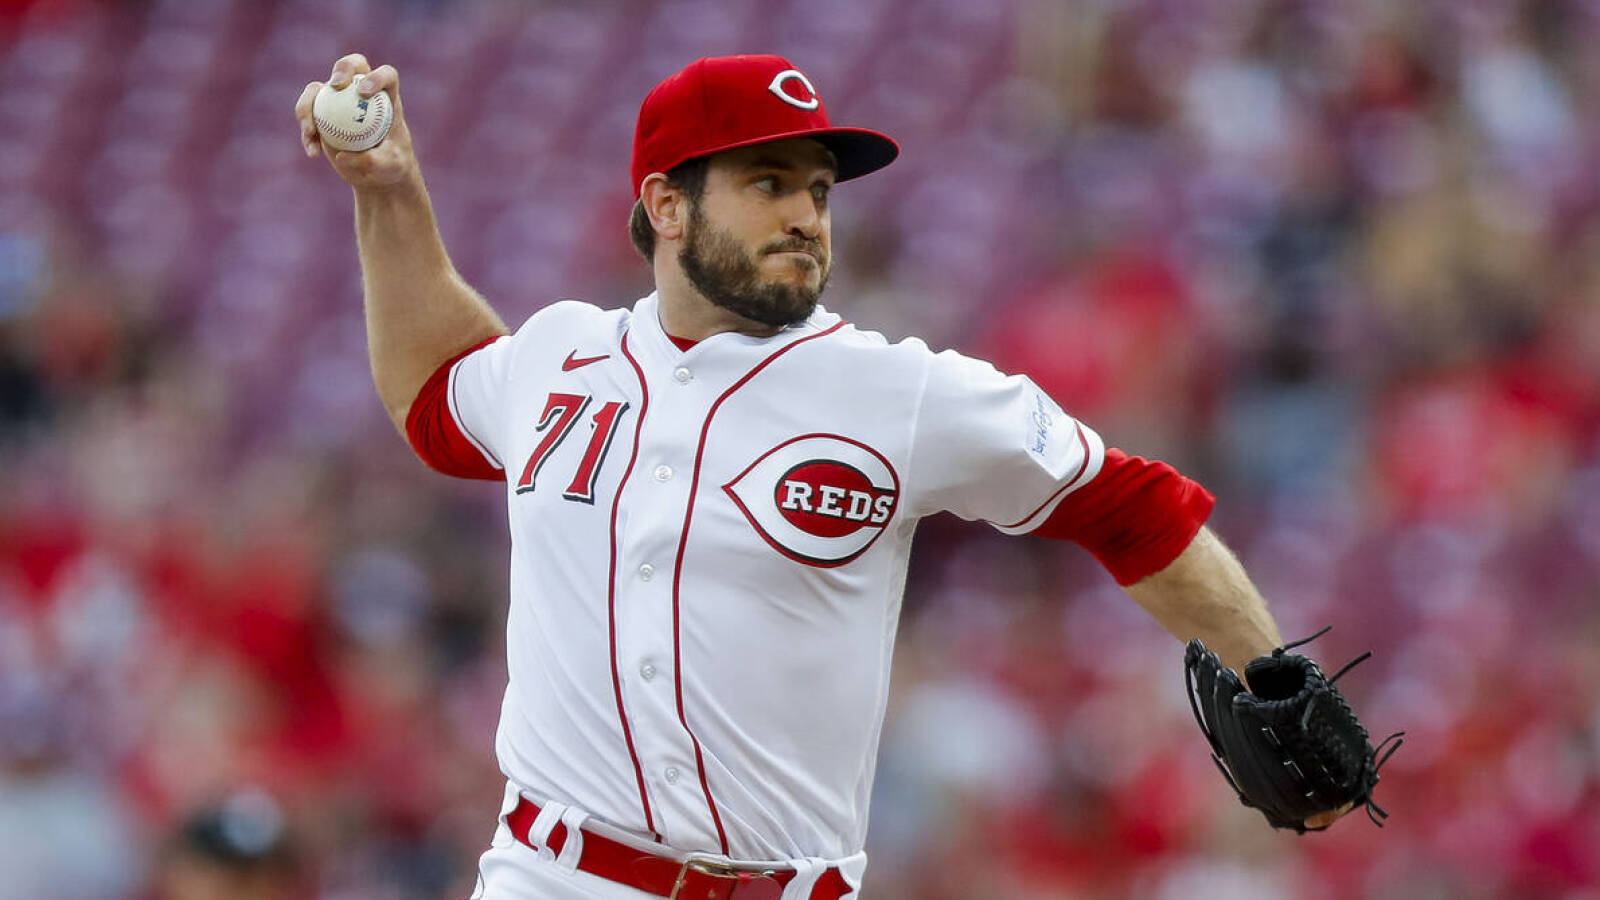 Reds pitcher has Tommy John surgery for second time | Yardbarker